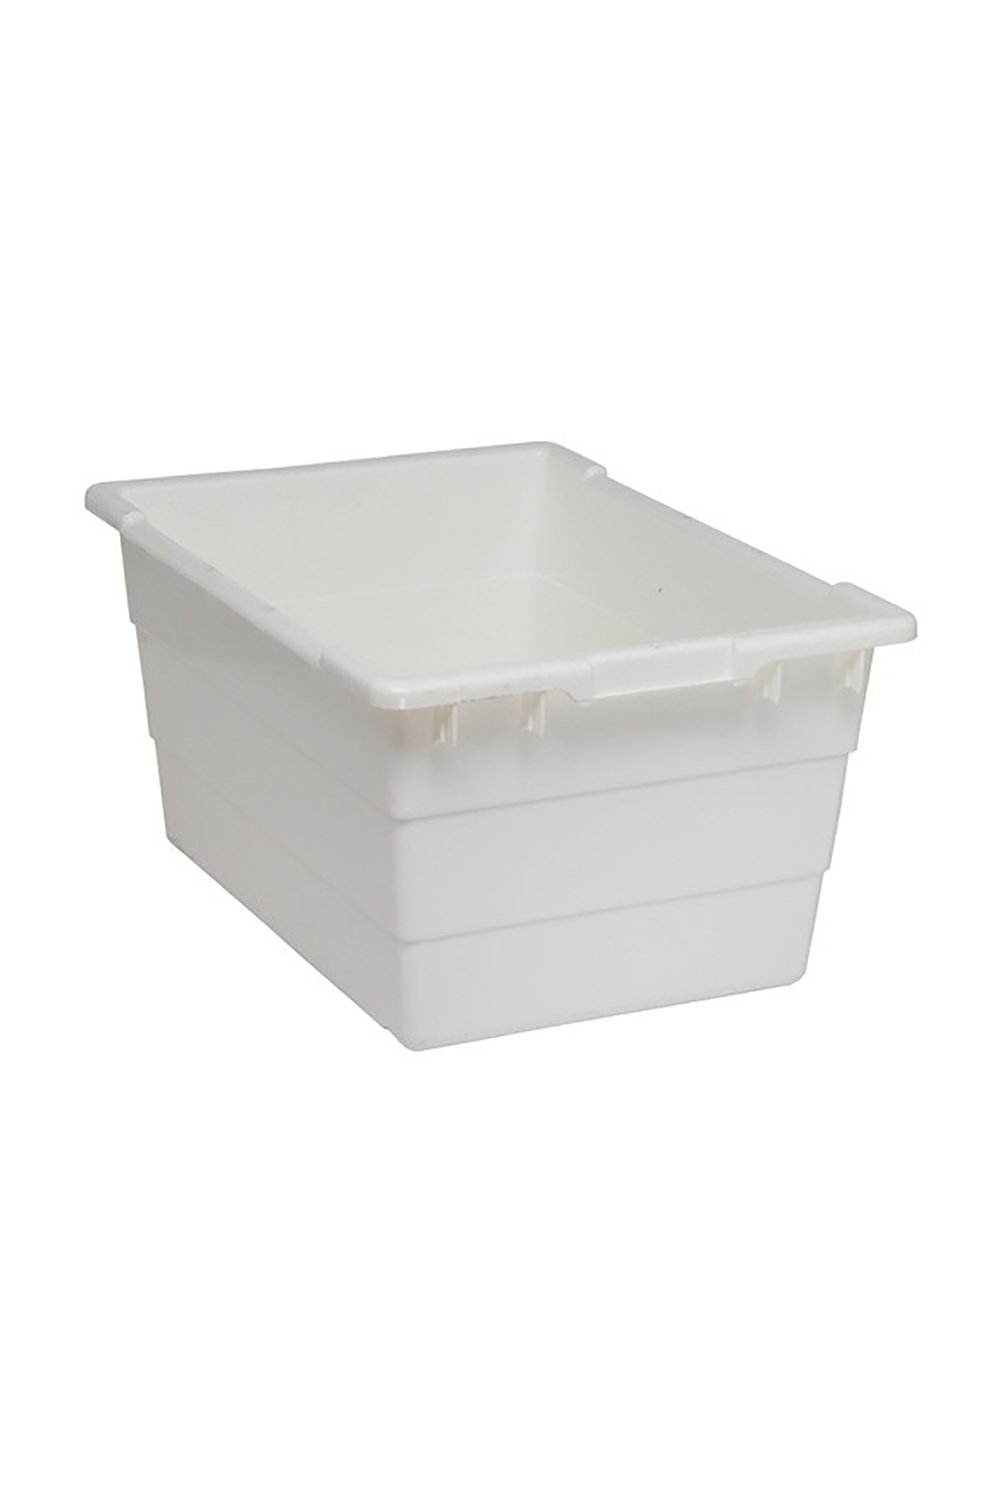 Cross Stack Tub Bins & Containers Acart 23-3/4"L x 17-1/4"W x 12"H White 